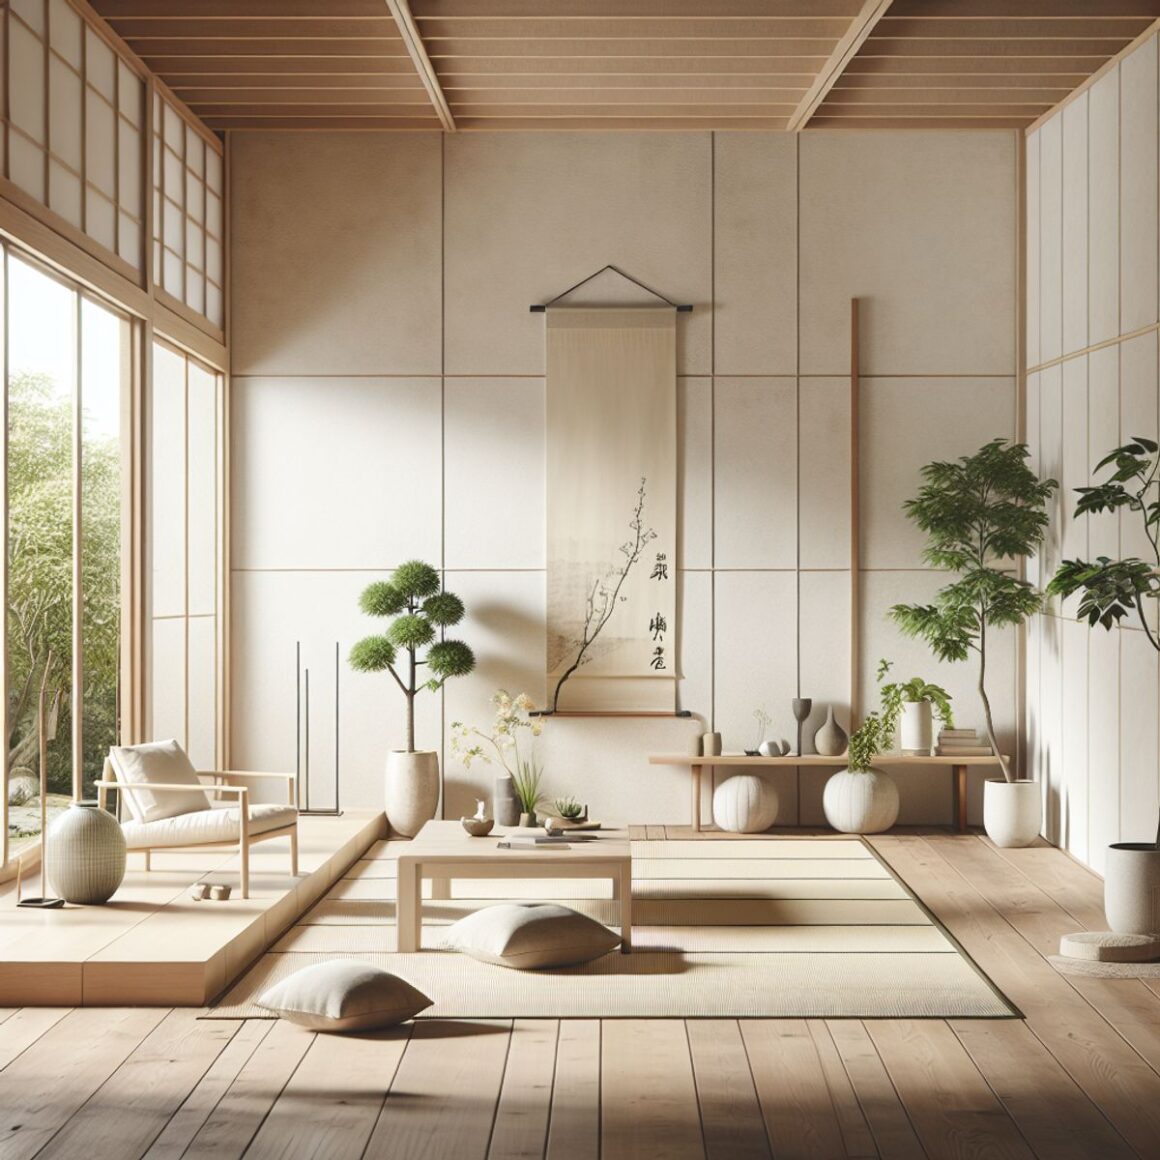 A serene, minimalist living space with elements of Japanese and Scandinavian design. Natural textures, light woods, neutrals with pops of color, and organic forms. Low table, clean-lined furniture, large window, off-white walls, wooden floors, indoor plant, traditional Japanese scroll without visible text.